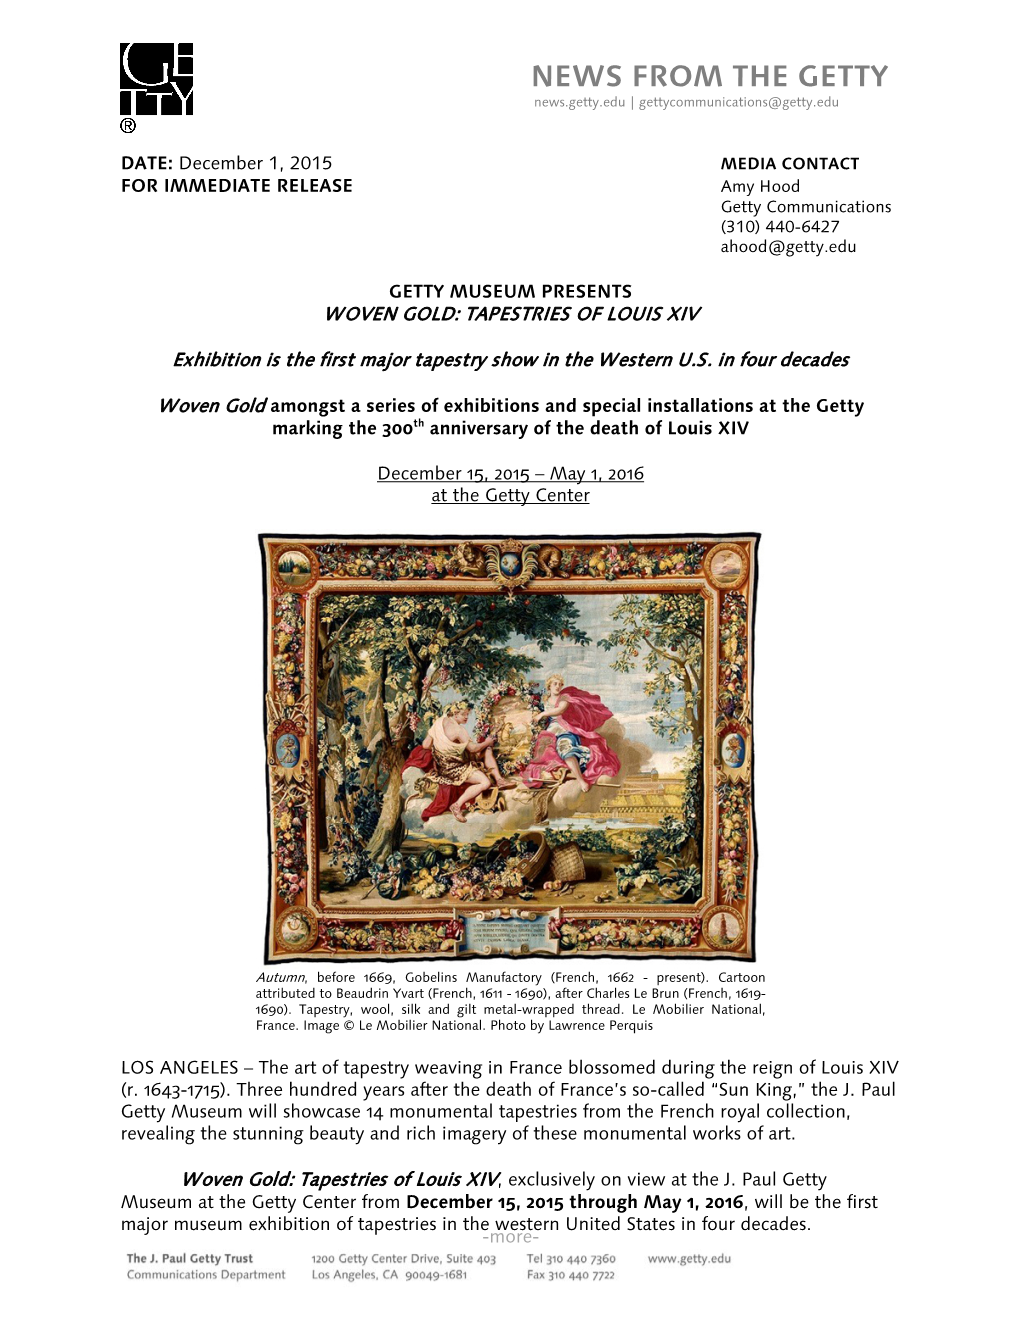 Woven Gold: Tapestries of Louis Xiv